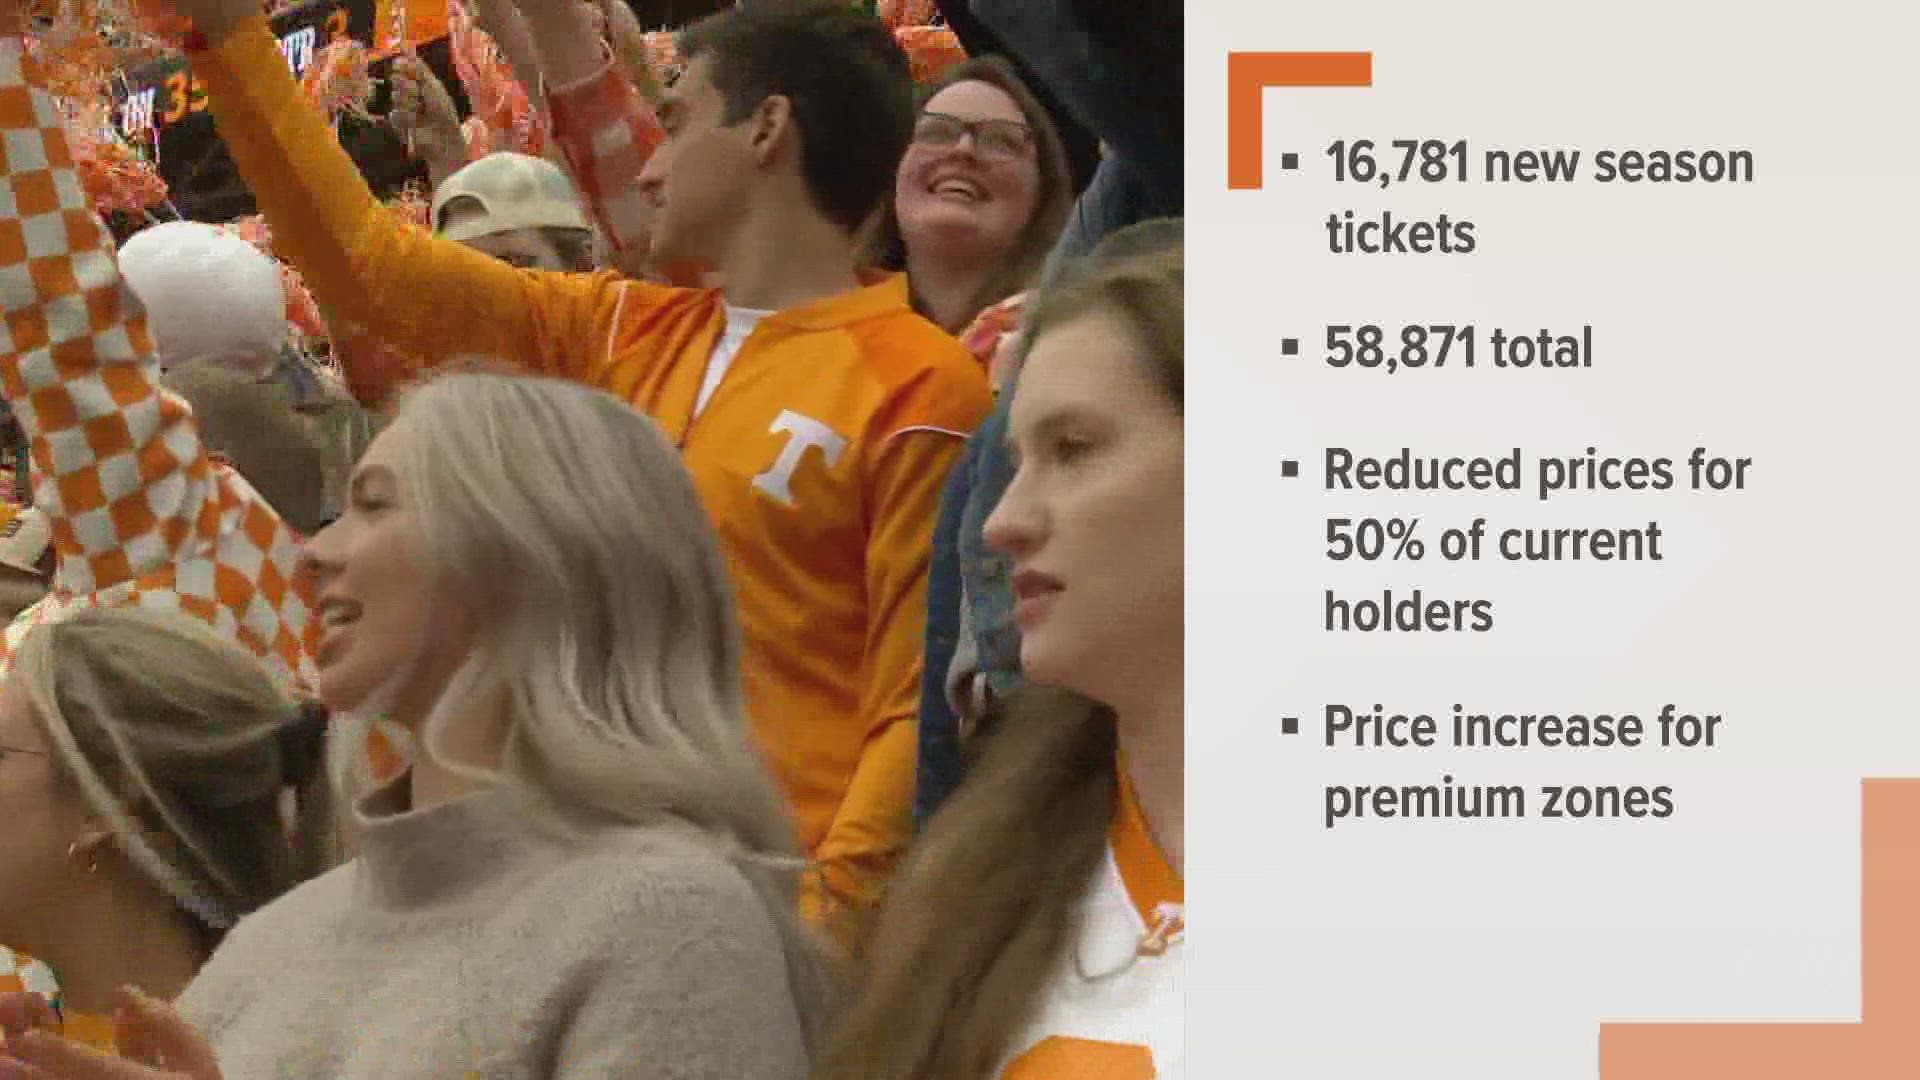 UT said it sold around 17,000 new season tickets for the 2022 football season. Its goal was only 10,000 tickets.